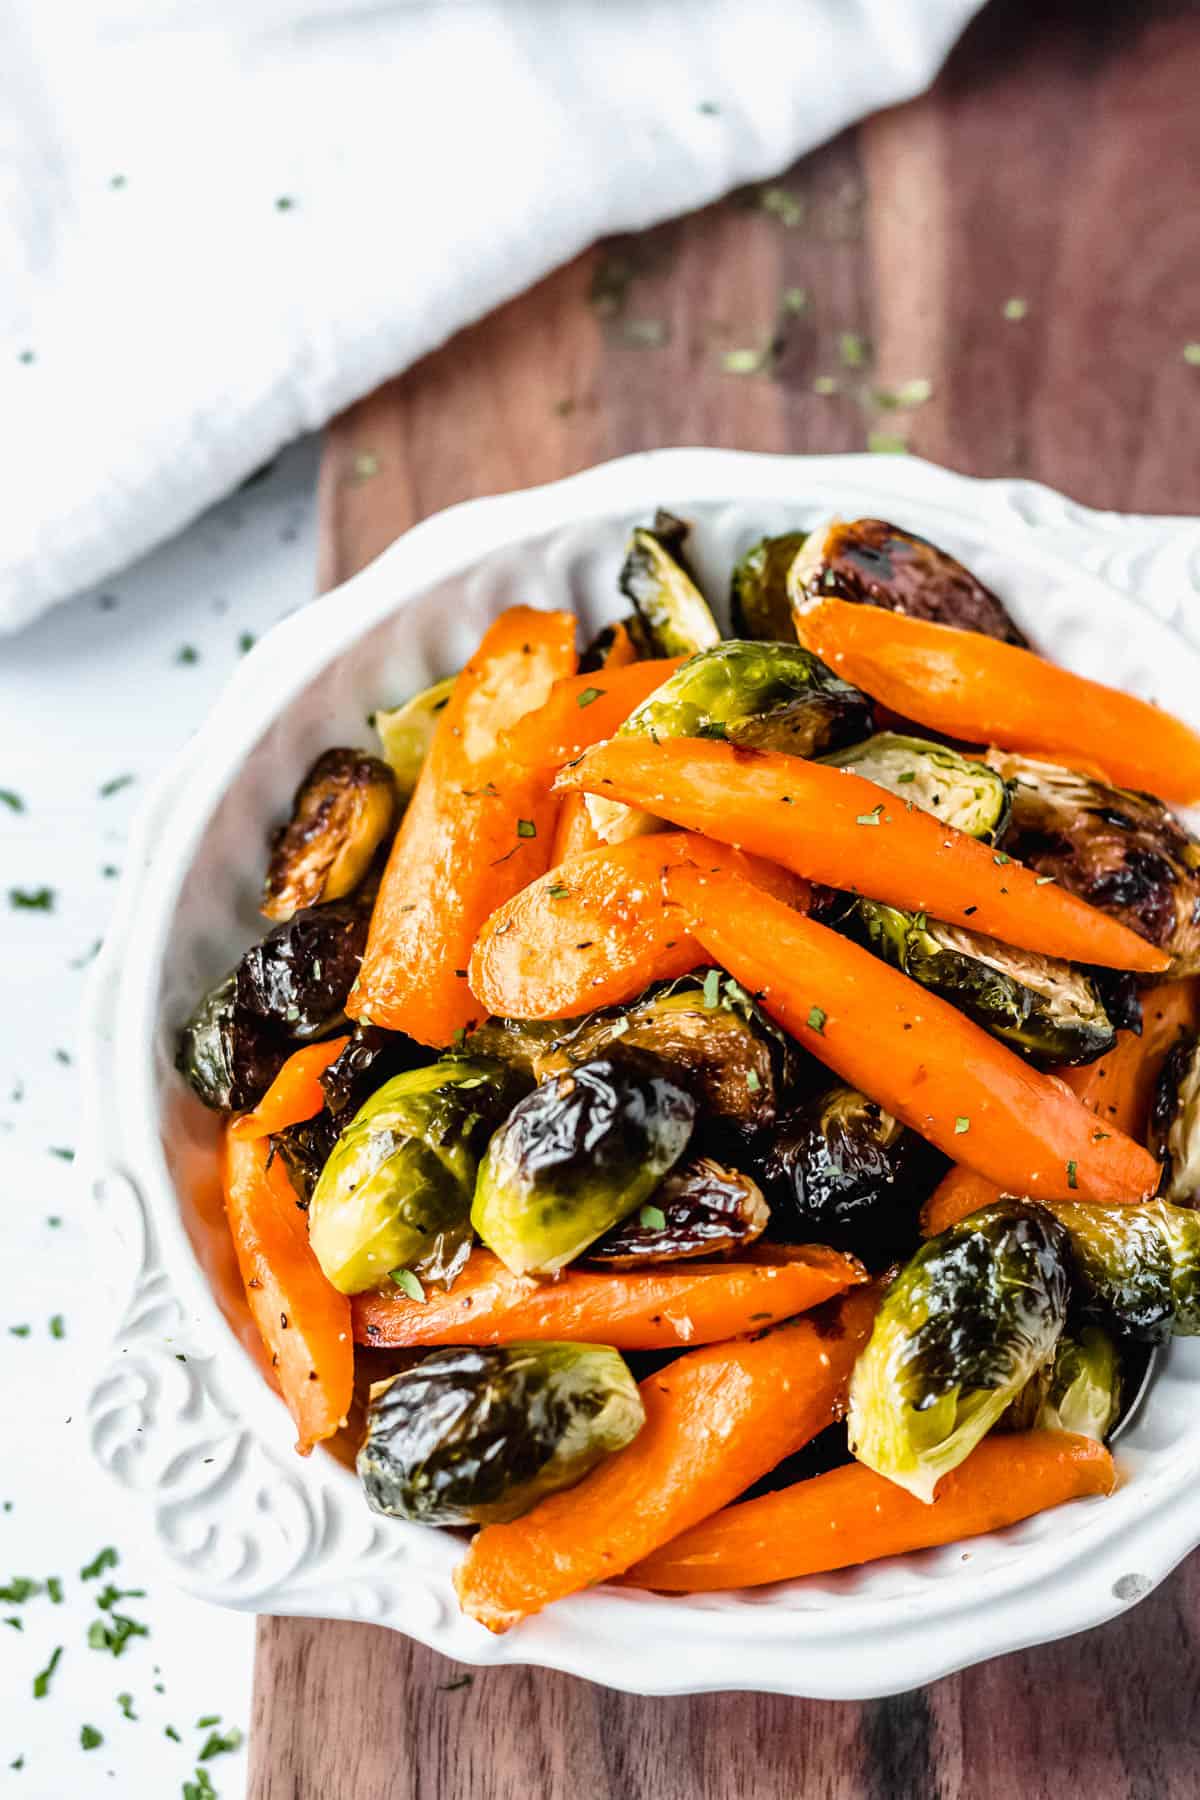 Maple roasted brussels sprouts and carrots in a white bowl over a wood board with a white towel in the background